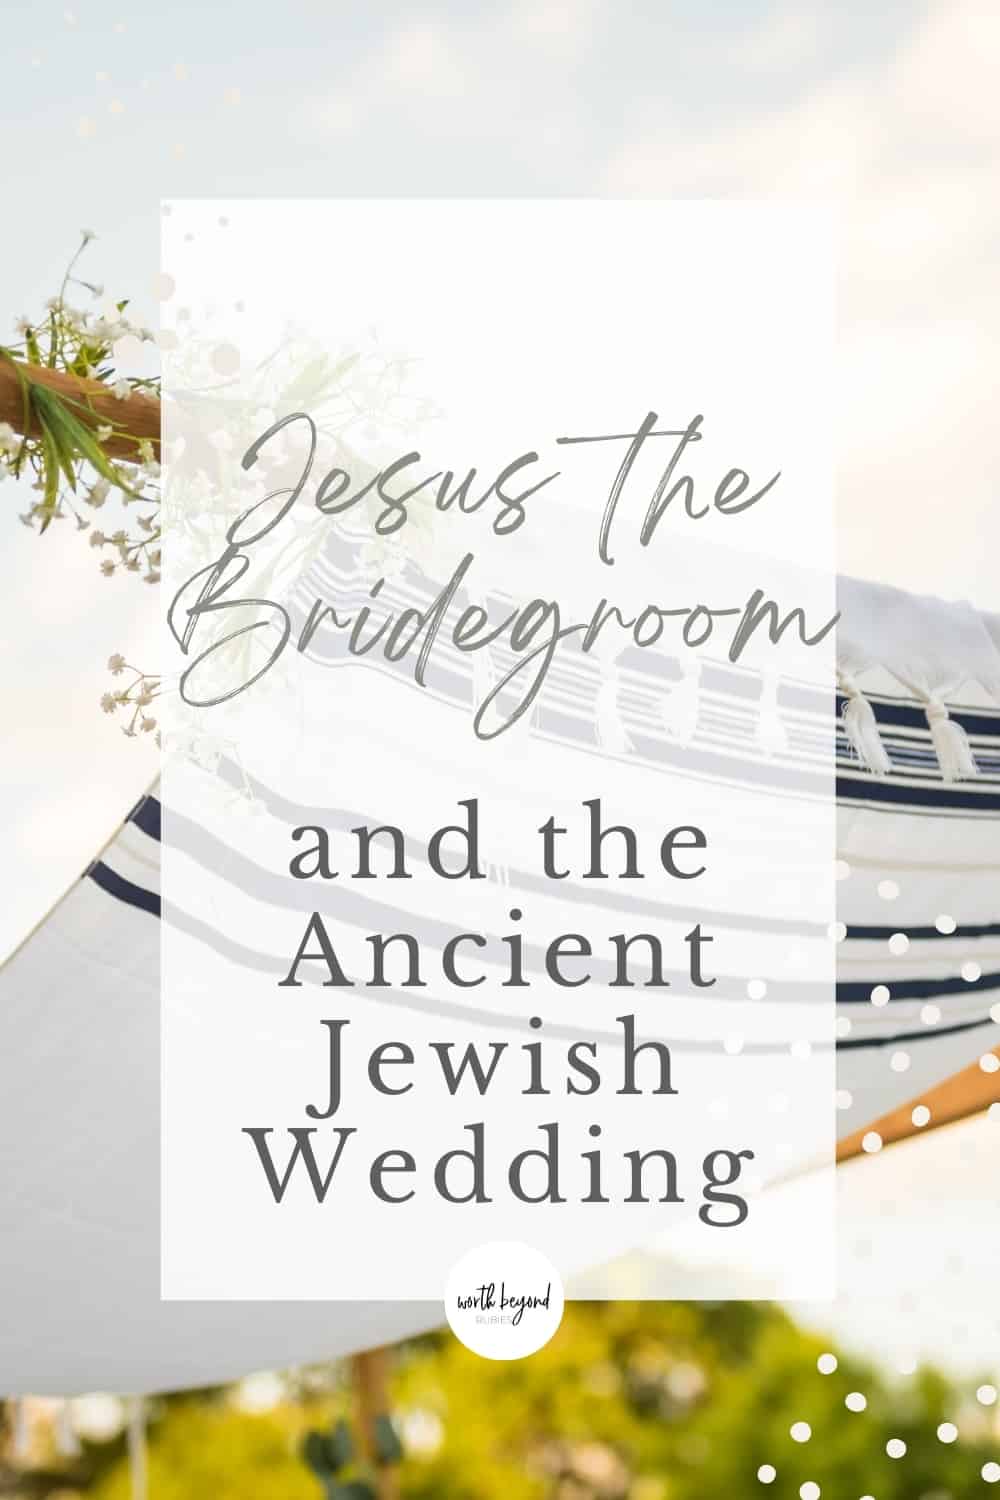 an image of a chuppah with a Jewish prayer shawl on top and text that says Jesus the Bridegroom and the Ancient Jewish Wedding